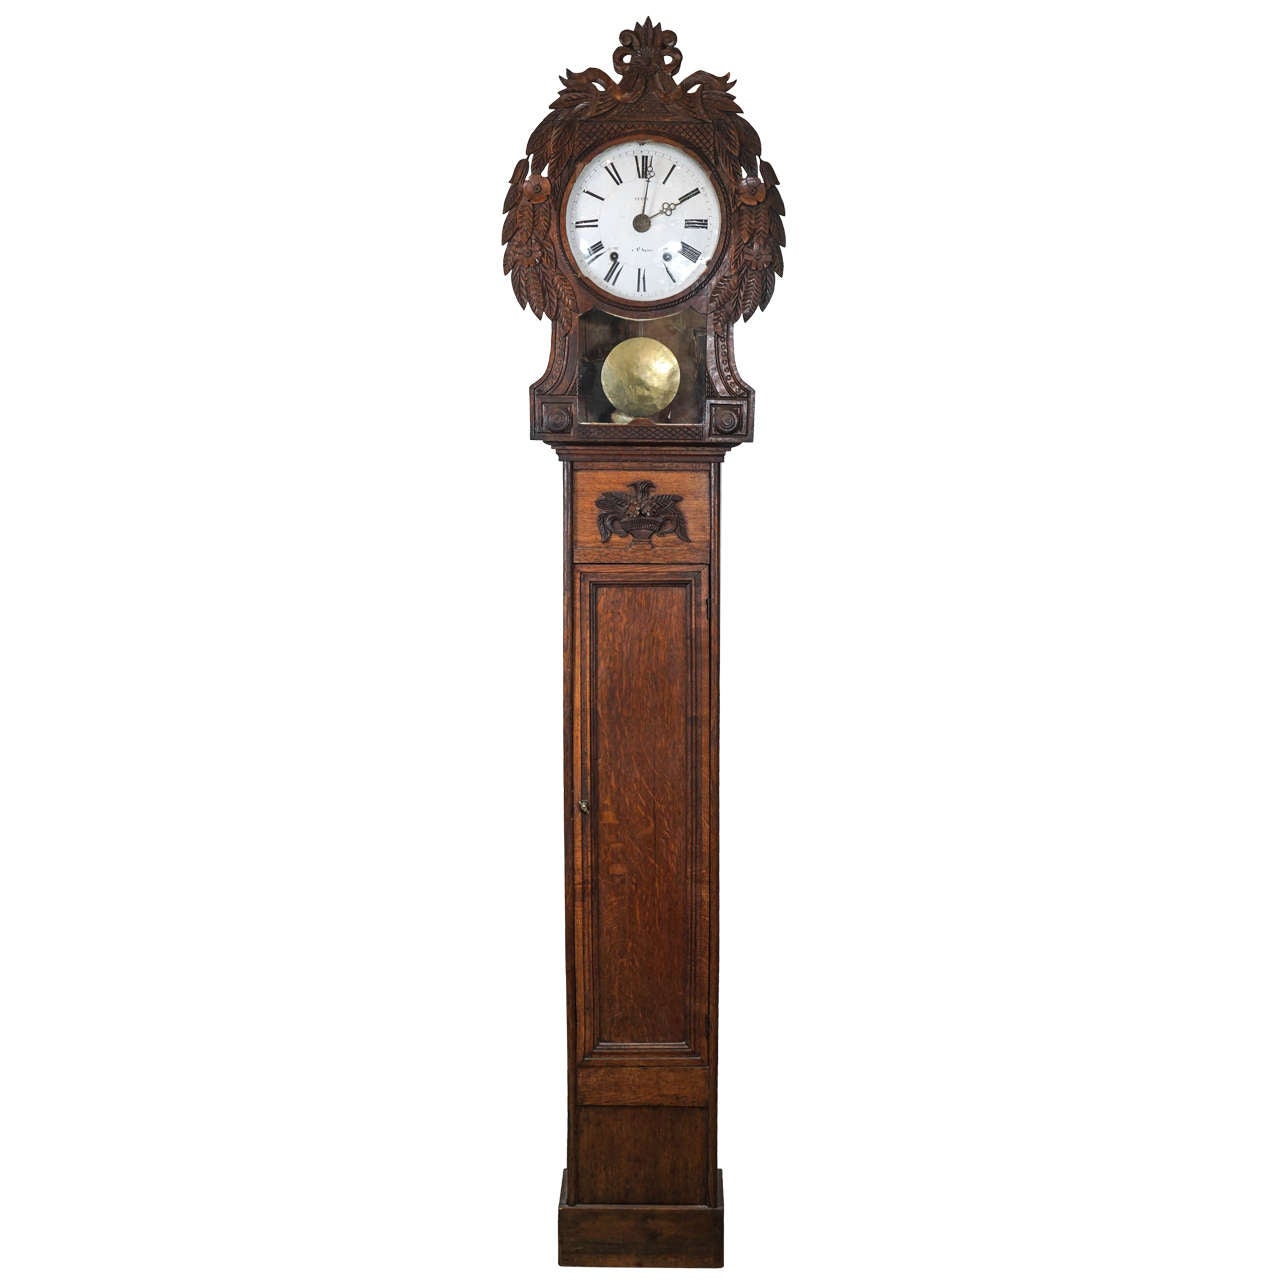 18th Century French Long Case Clock from Normandy - "Saturday Sale"